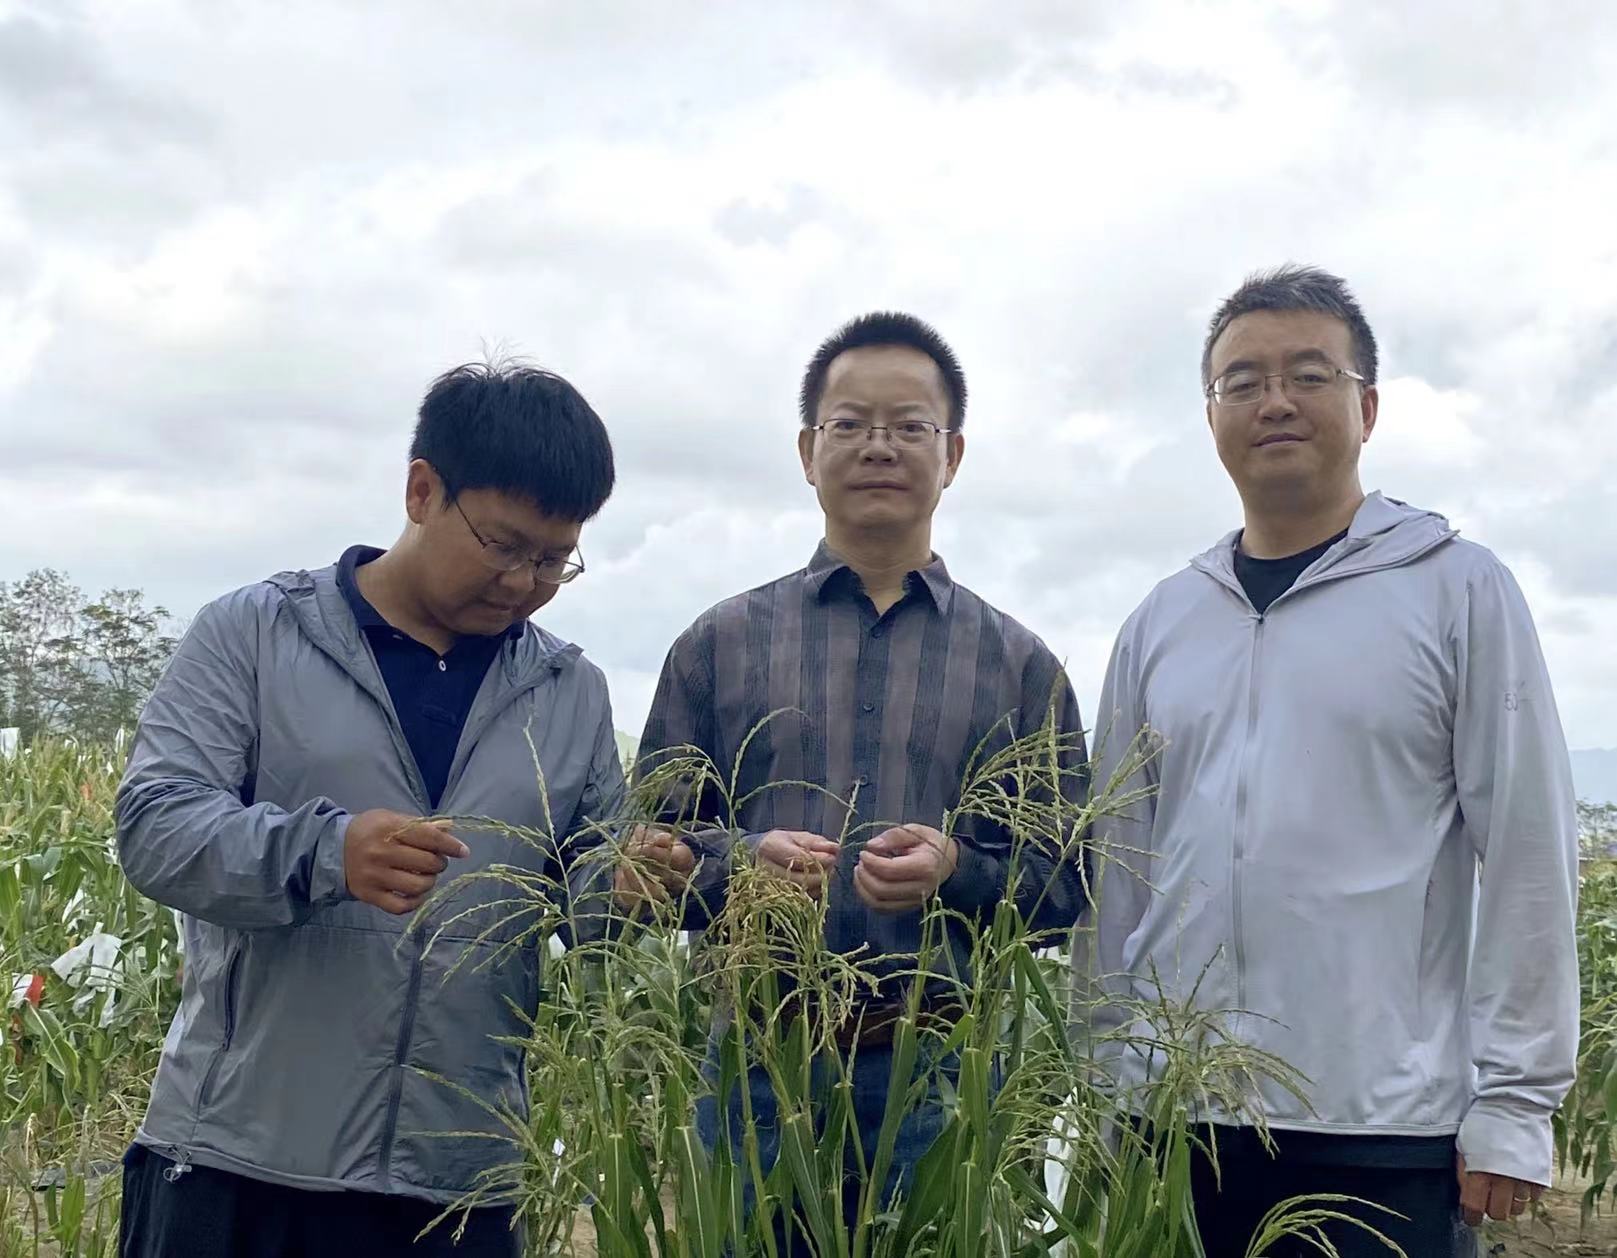 The photo of Wu Yongrui's research team working in a maize field in Sanya, South China's Hainan Province. Source: The Paper